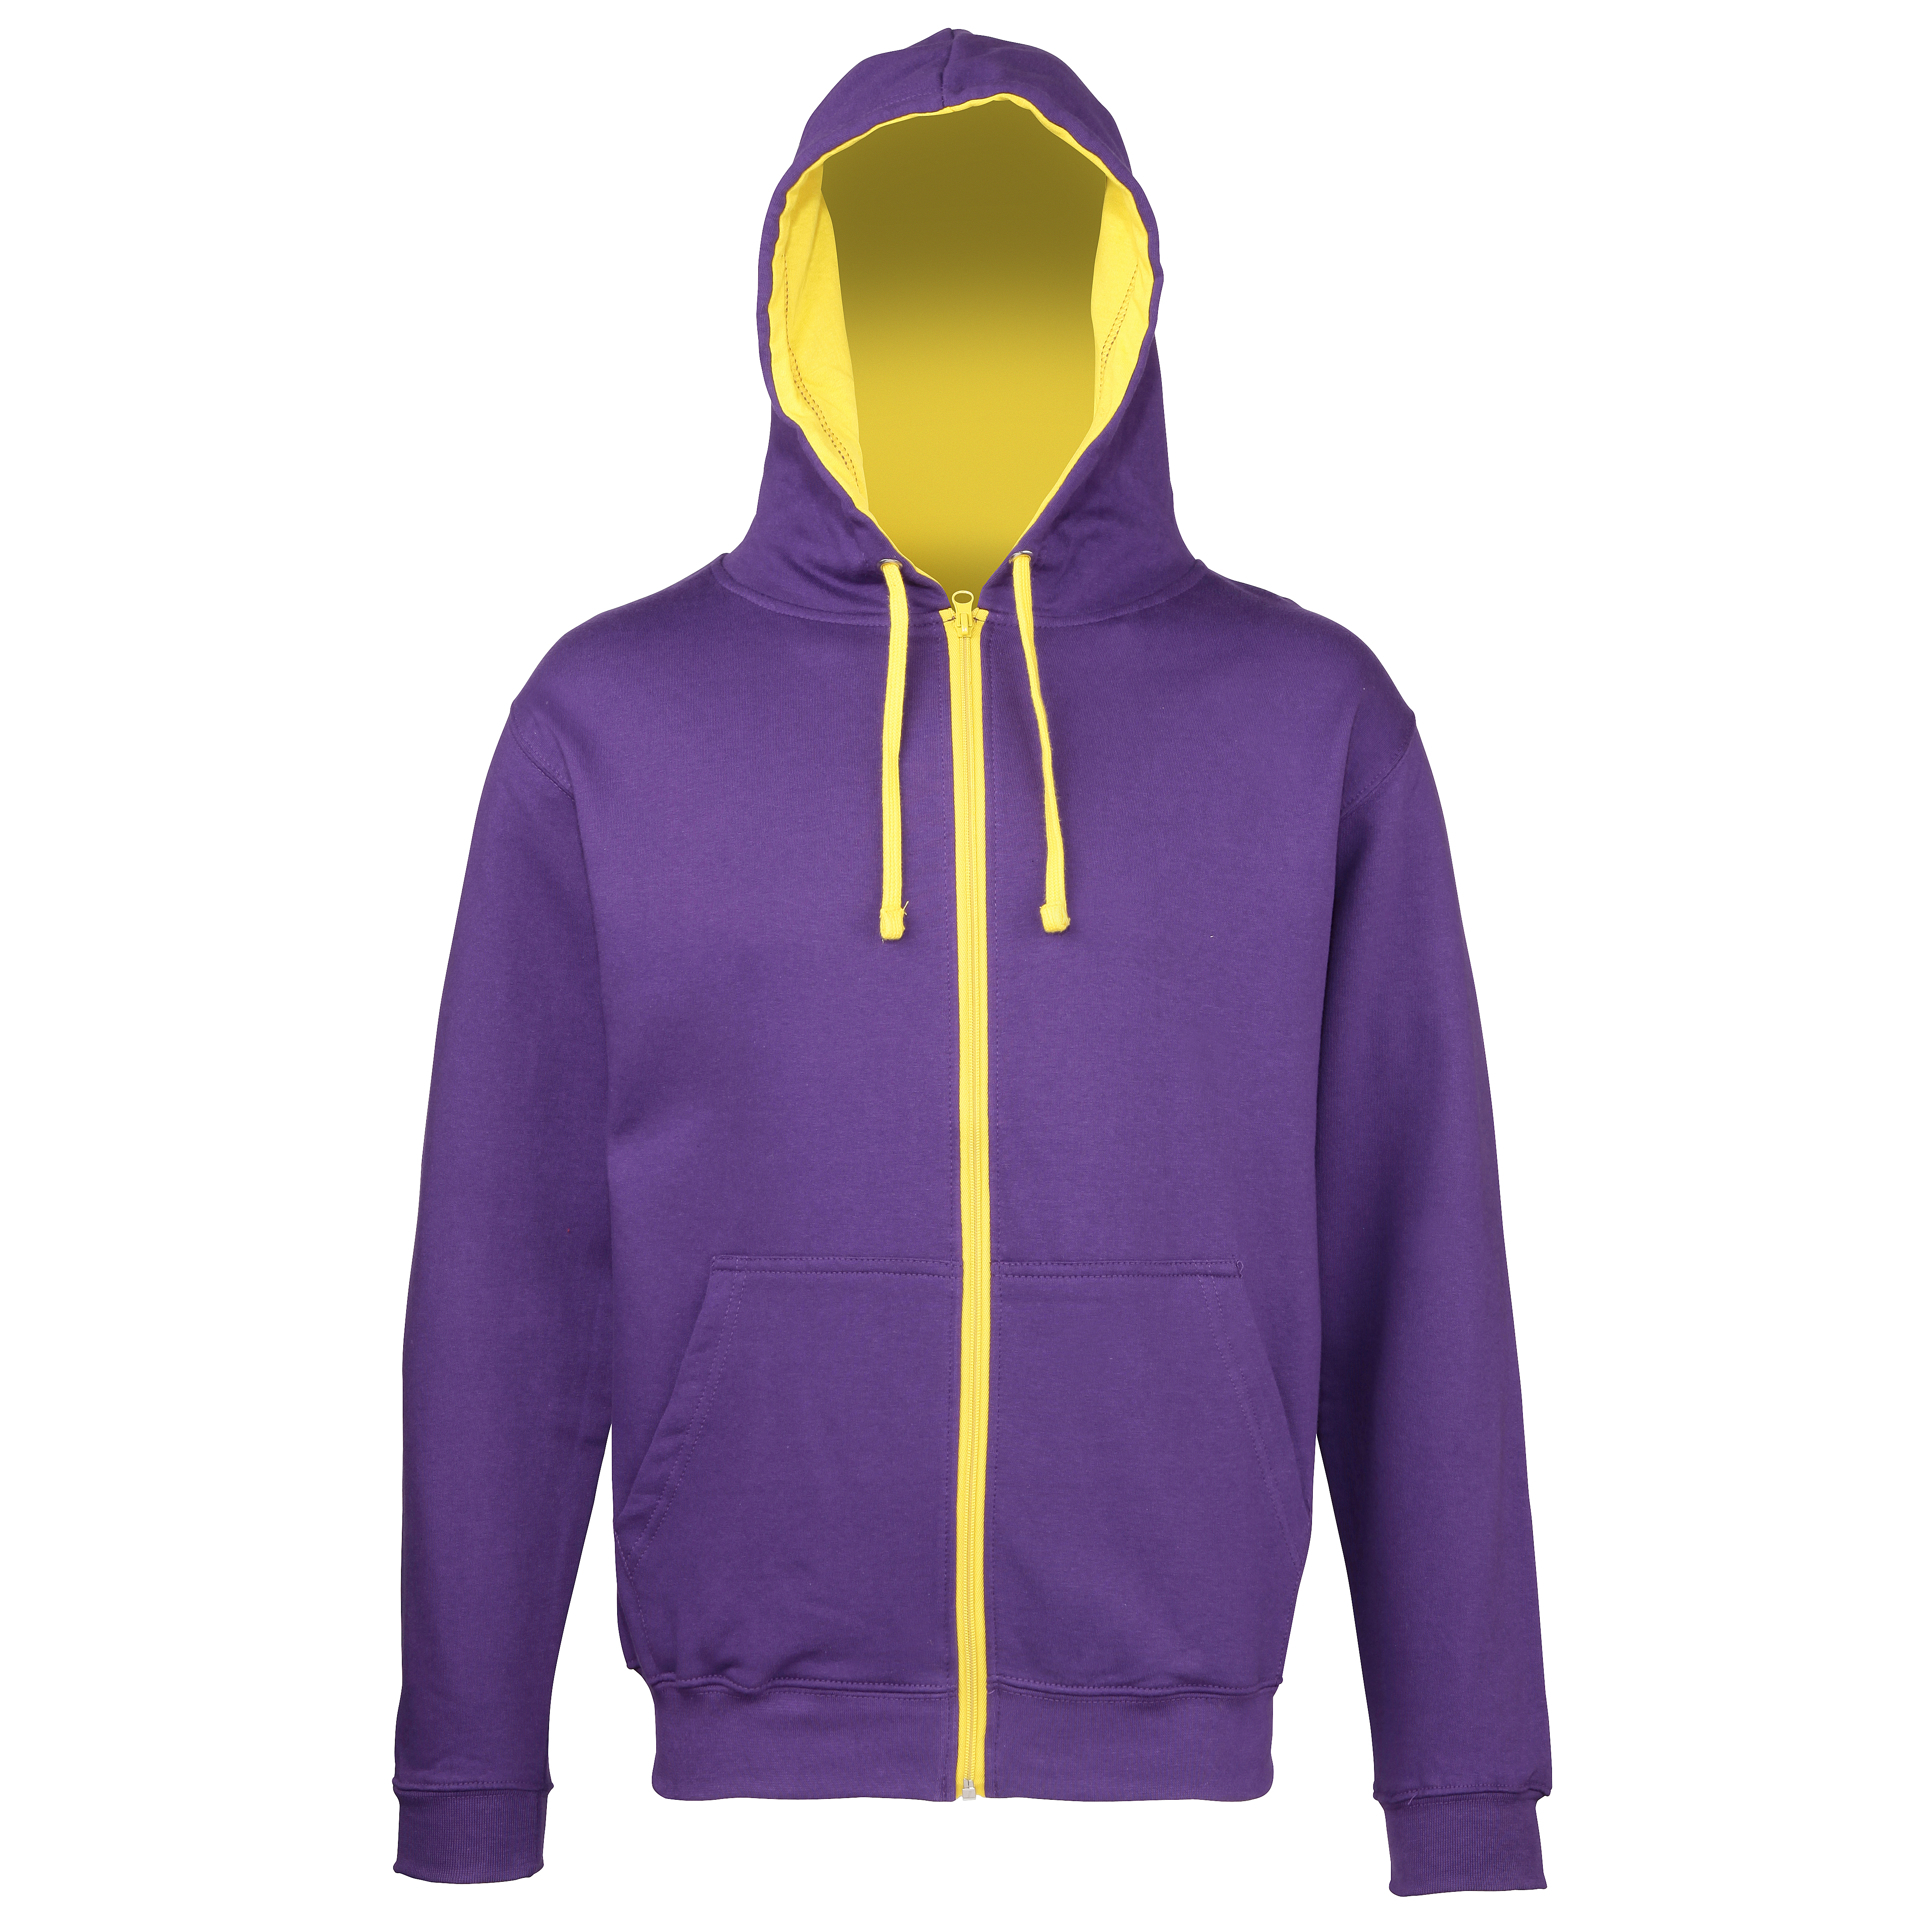 Men's Varsity Hoodie in purple with yellow details and lining